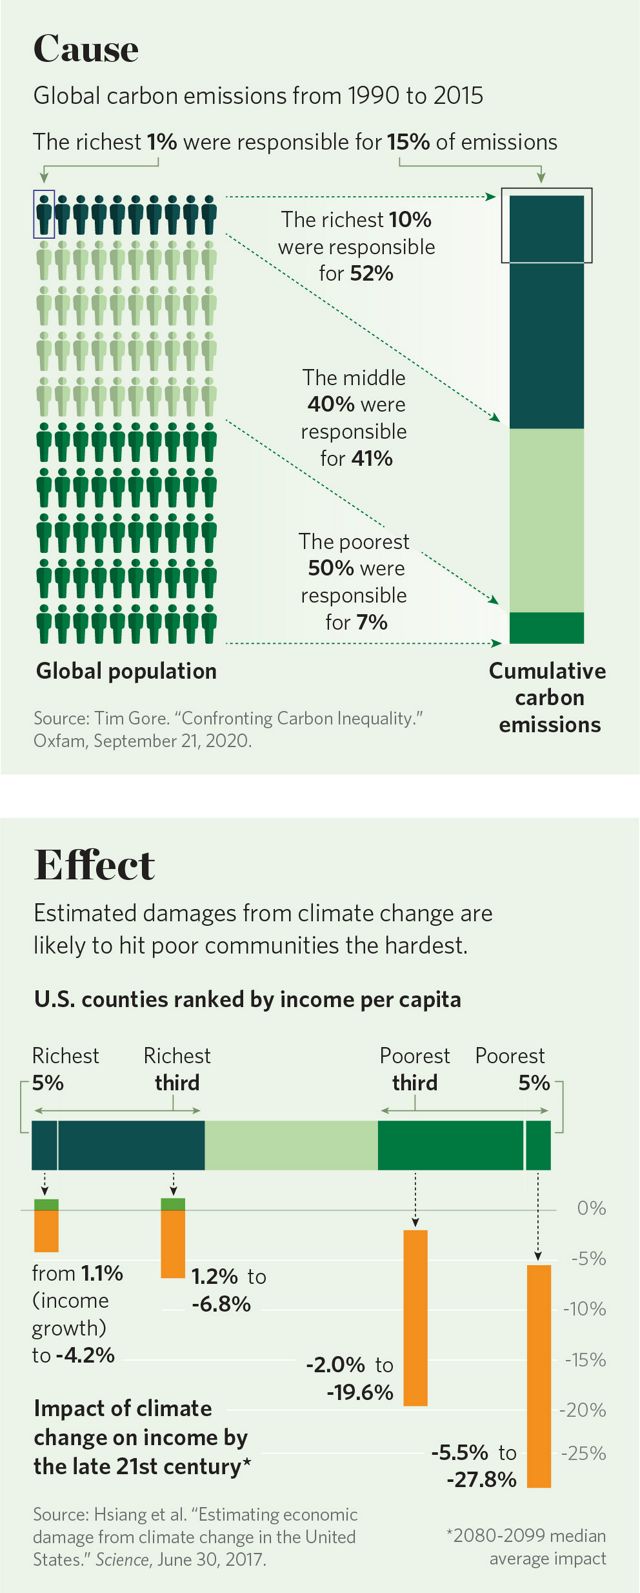 Graphics show the Cause and Effect of climate impacts.